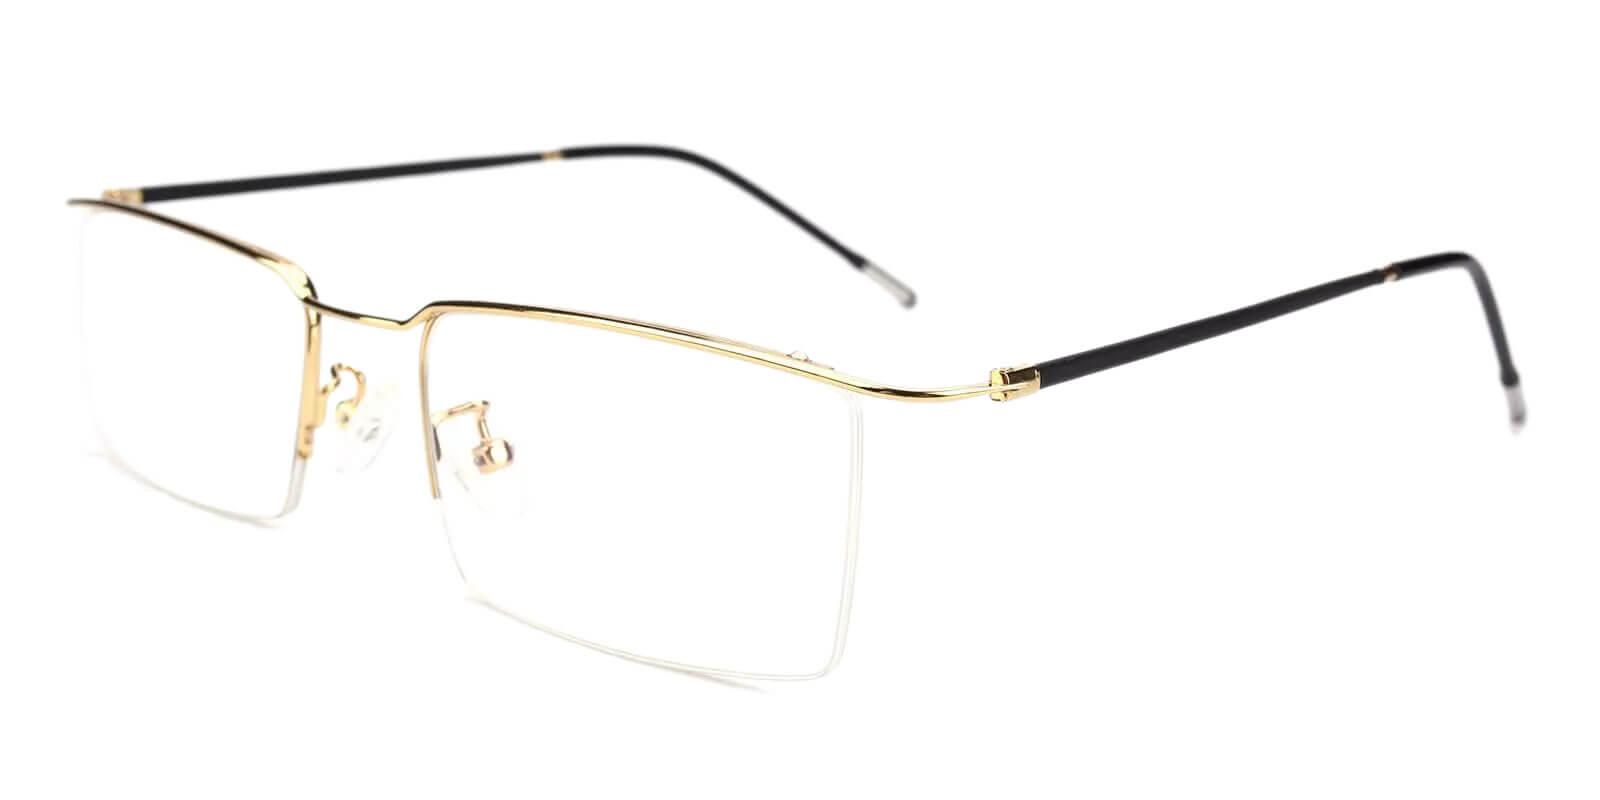 Wit Gold Metal Eyeglasses , NosePads Frames from ABBE Glasses